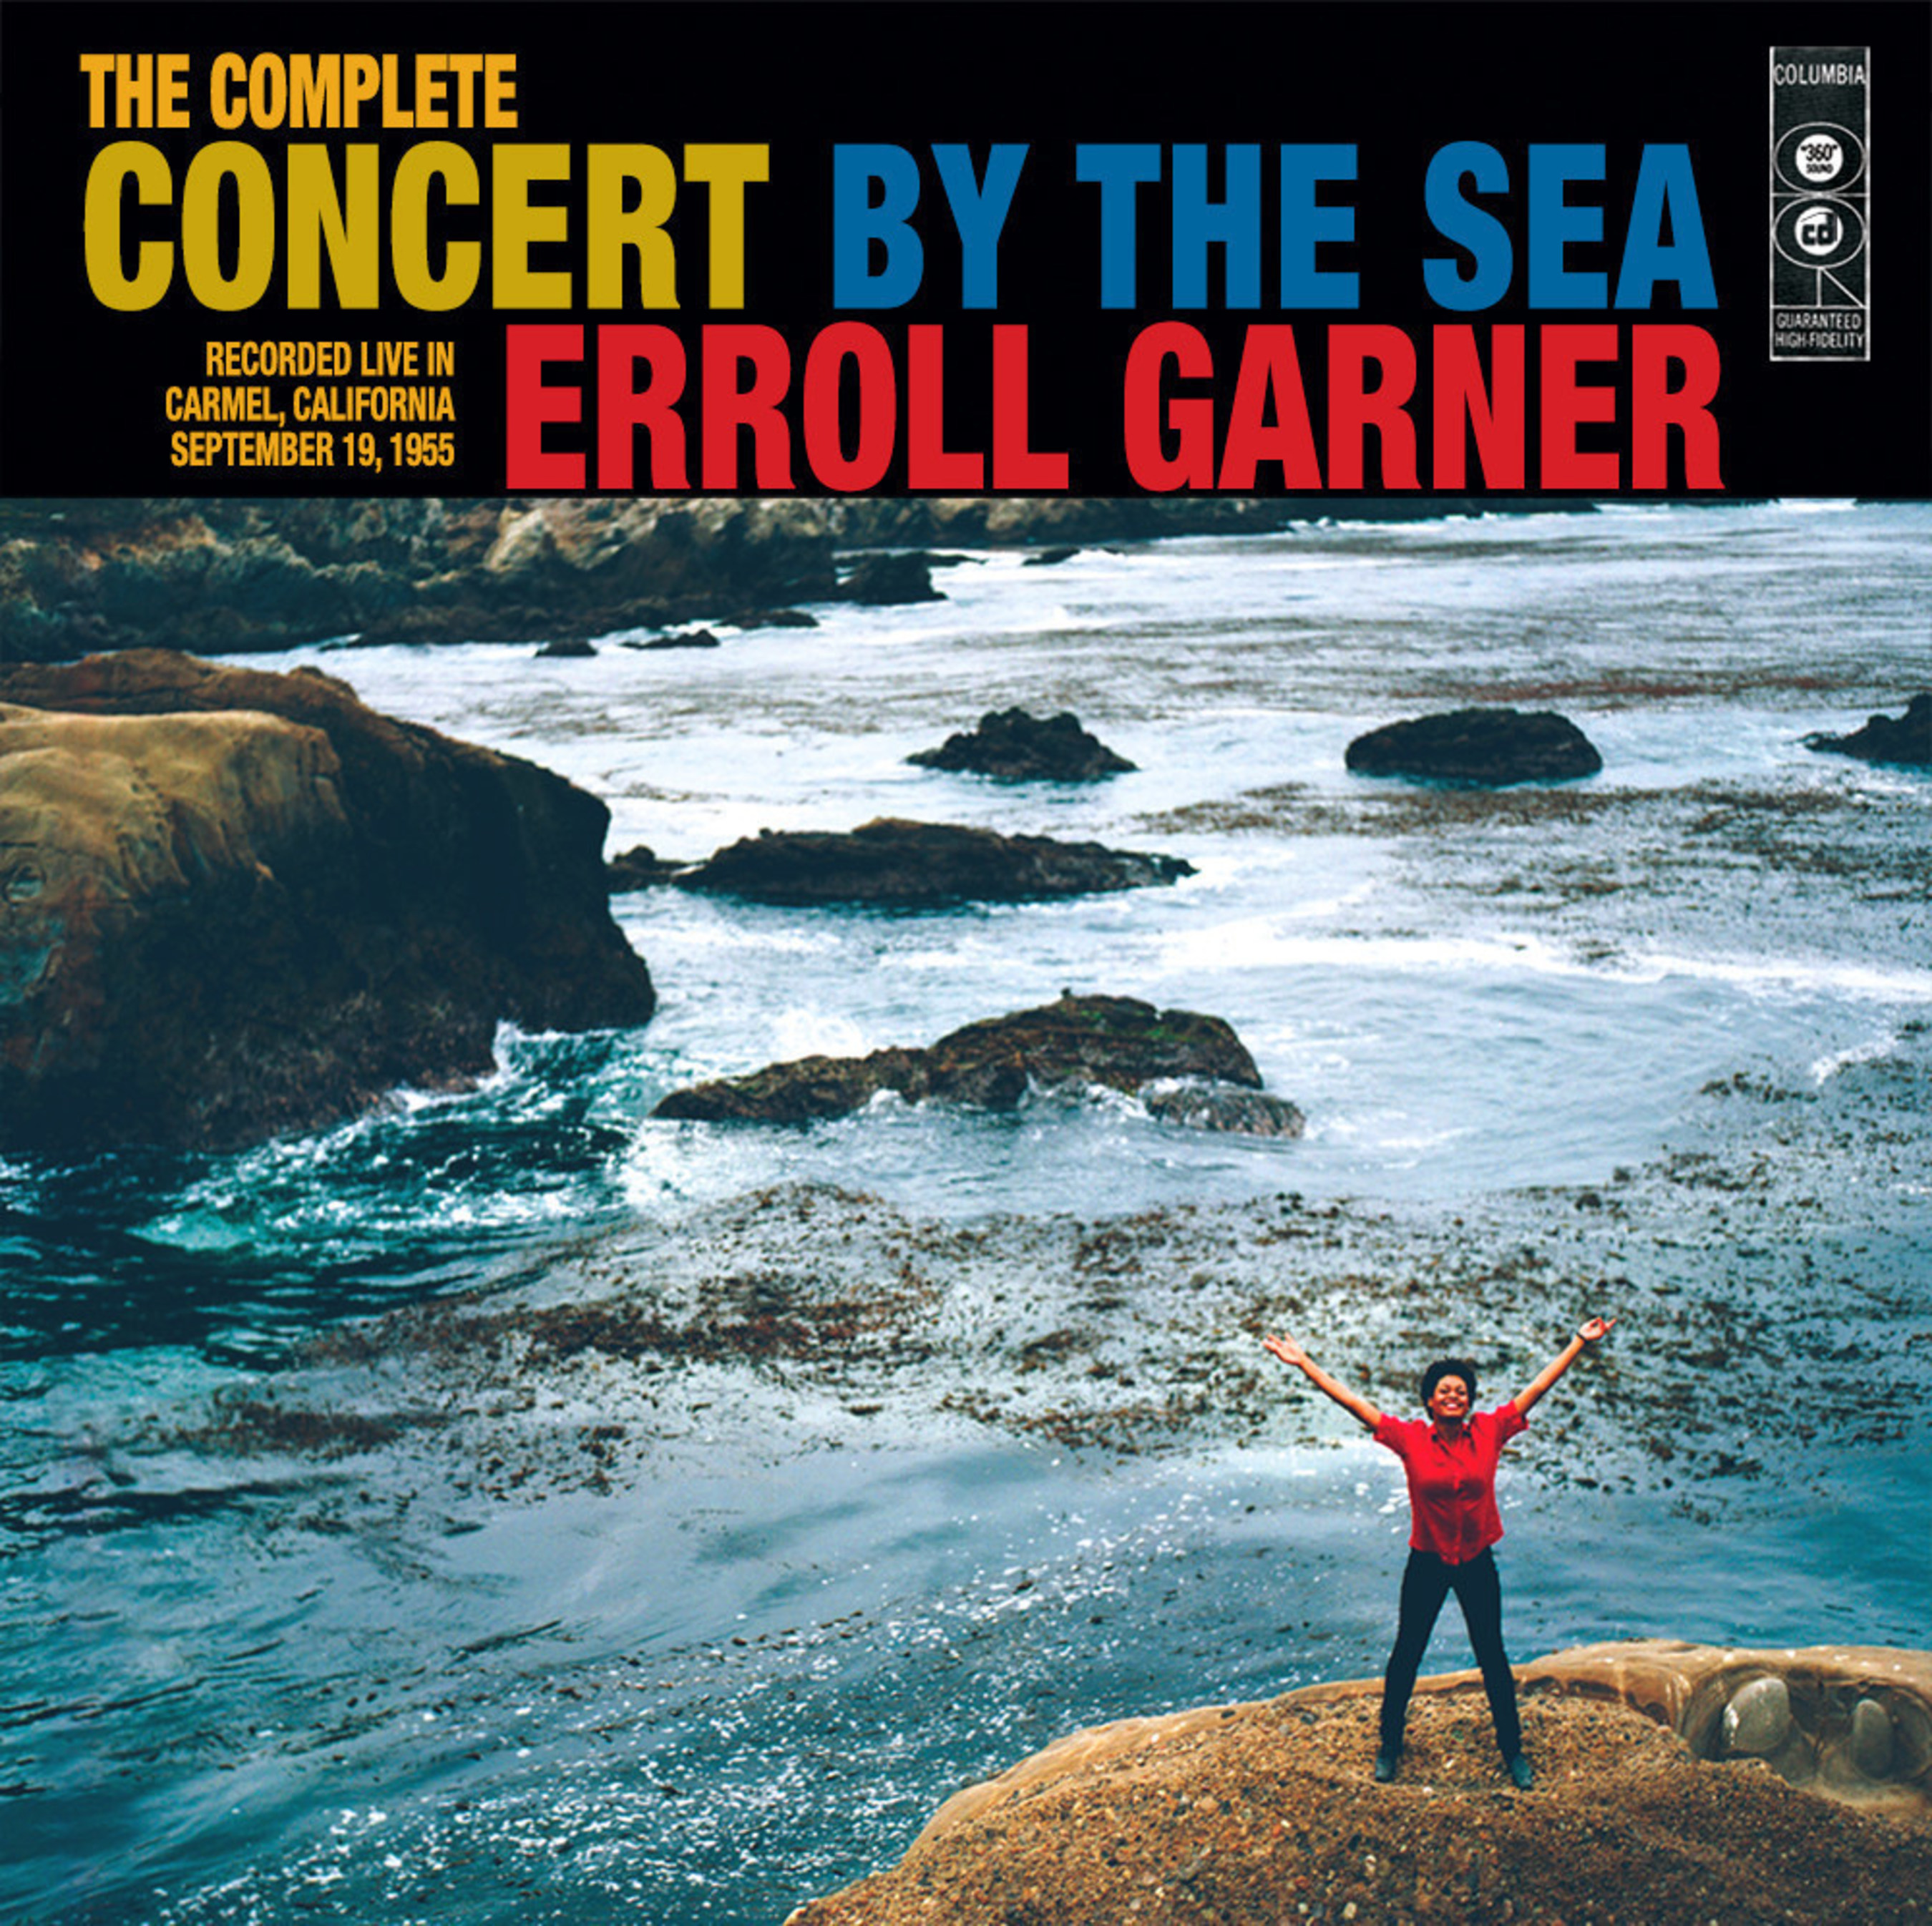 "The Complete Concert By The Sea" will be released jointly by Sony Legacy and Octave Music Publishing Corporation on September 18, 2015.